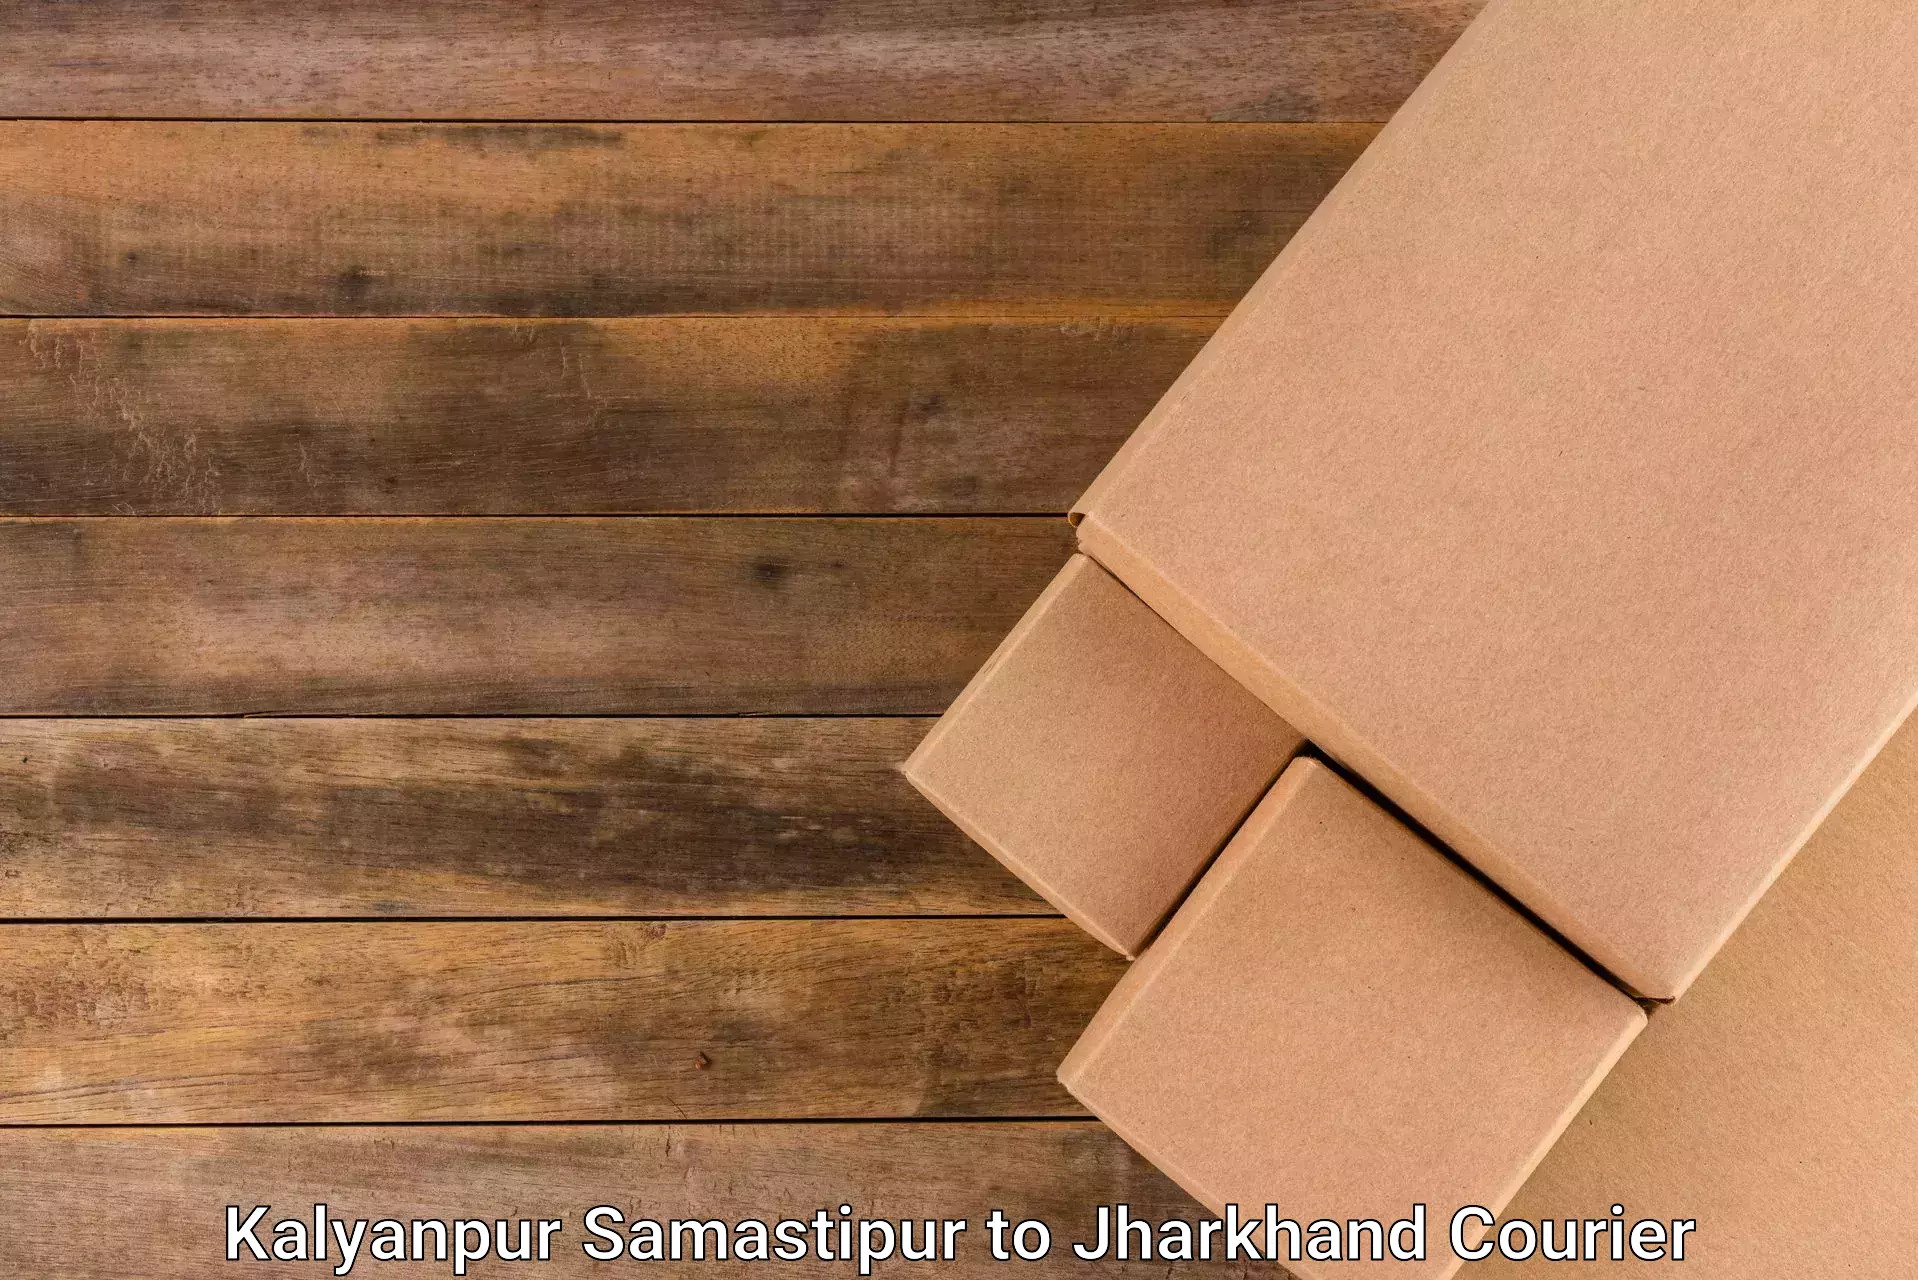 Affordable parcel service Kalyanpur Samastipur to Jharkhand